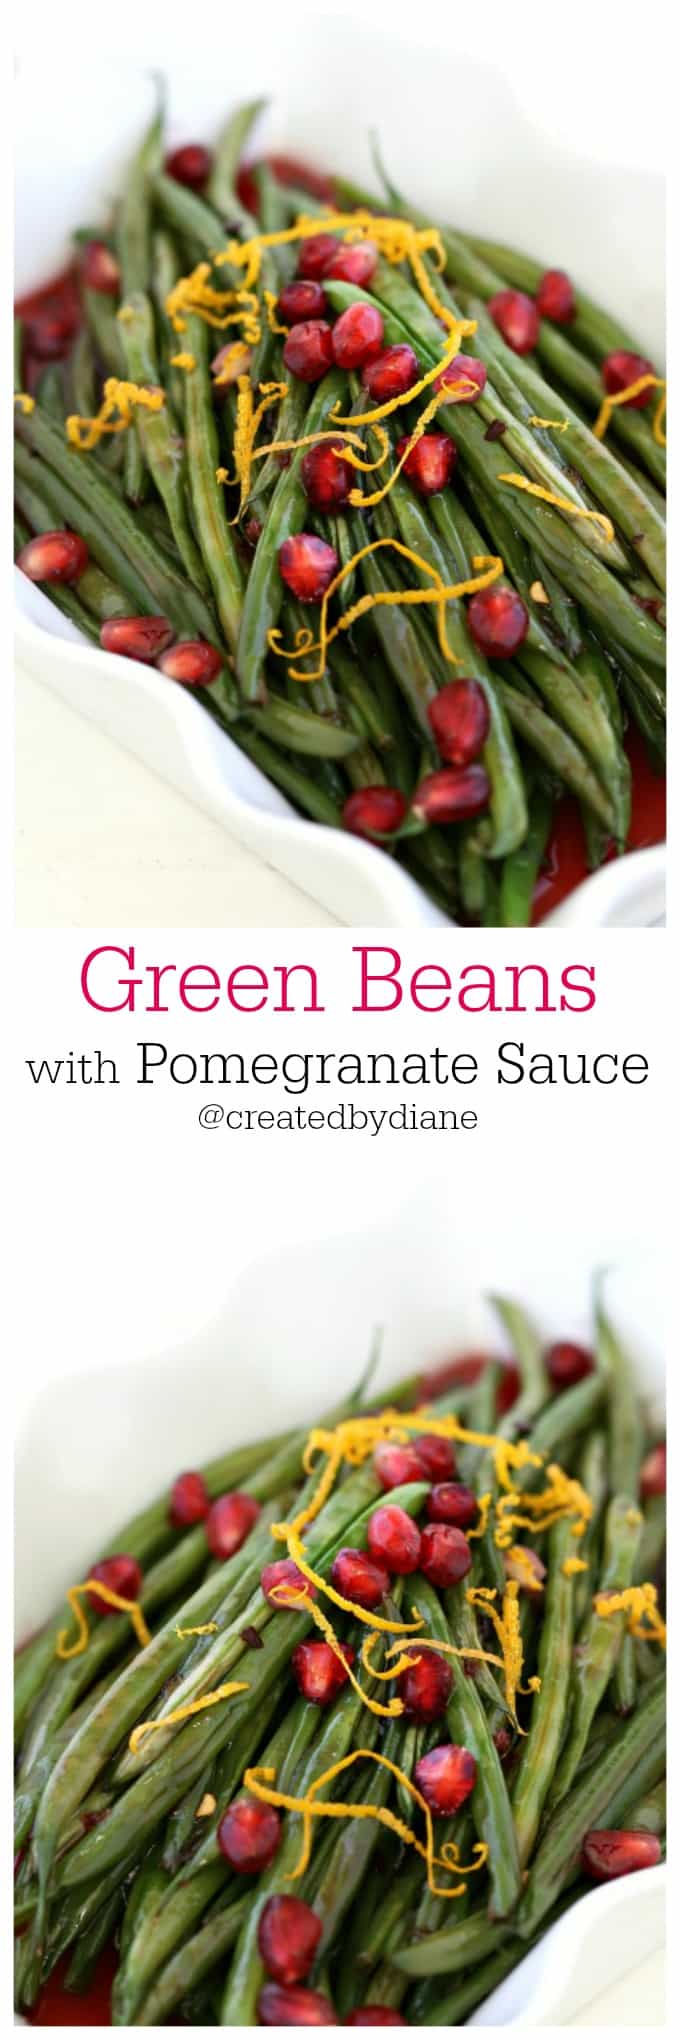 Green beans with pomegranate sauce from @createdbydiane